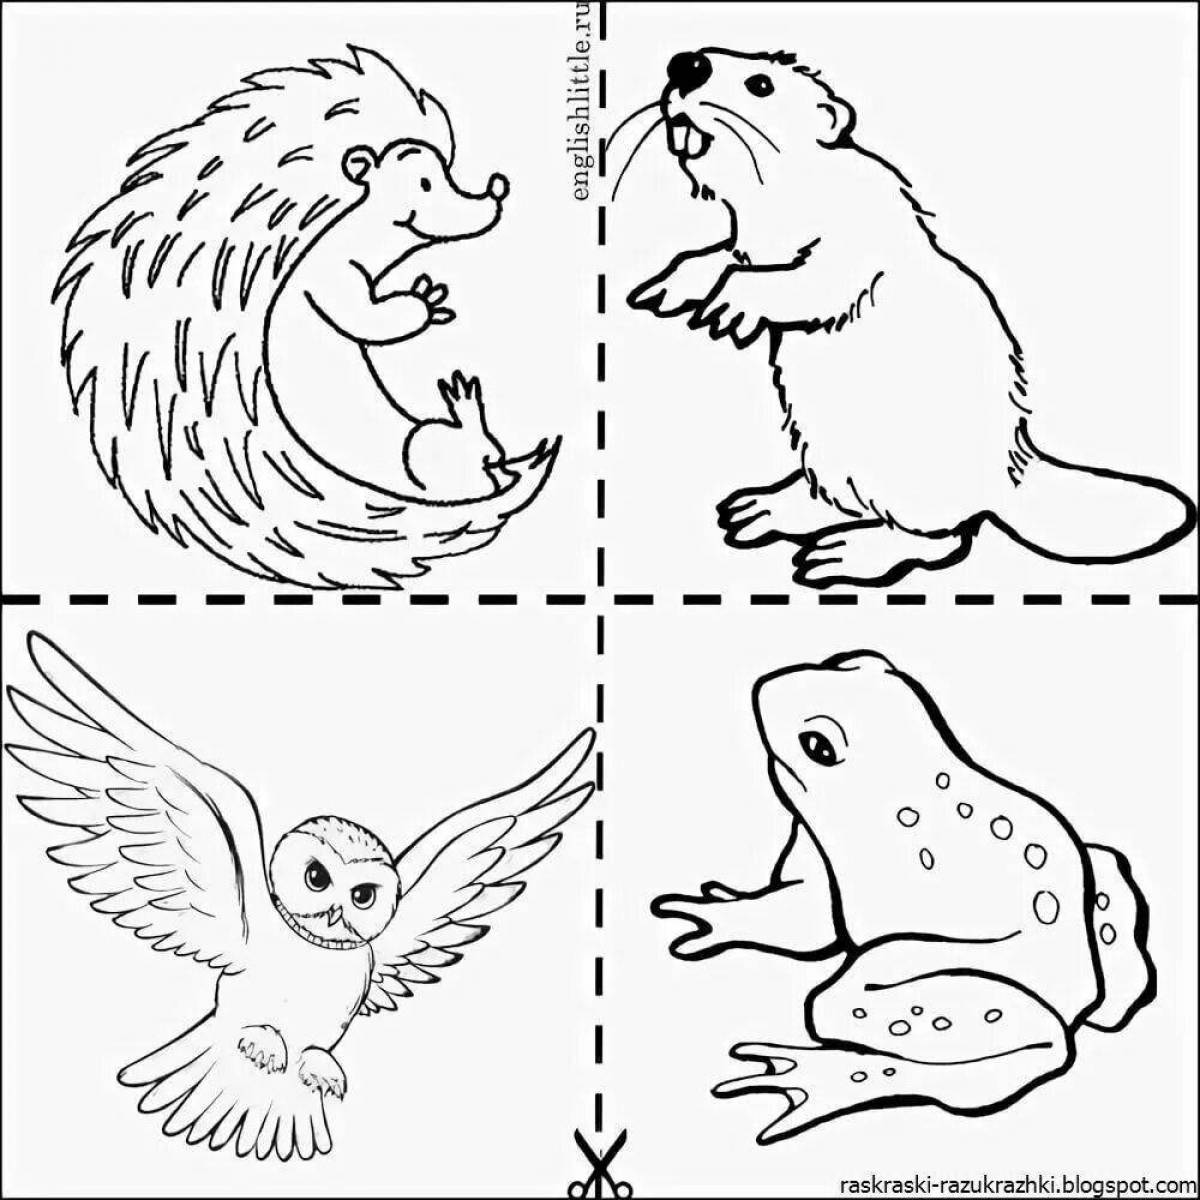 Wonderful coloring pages